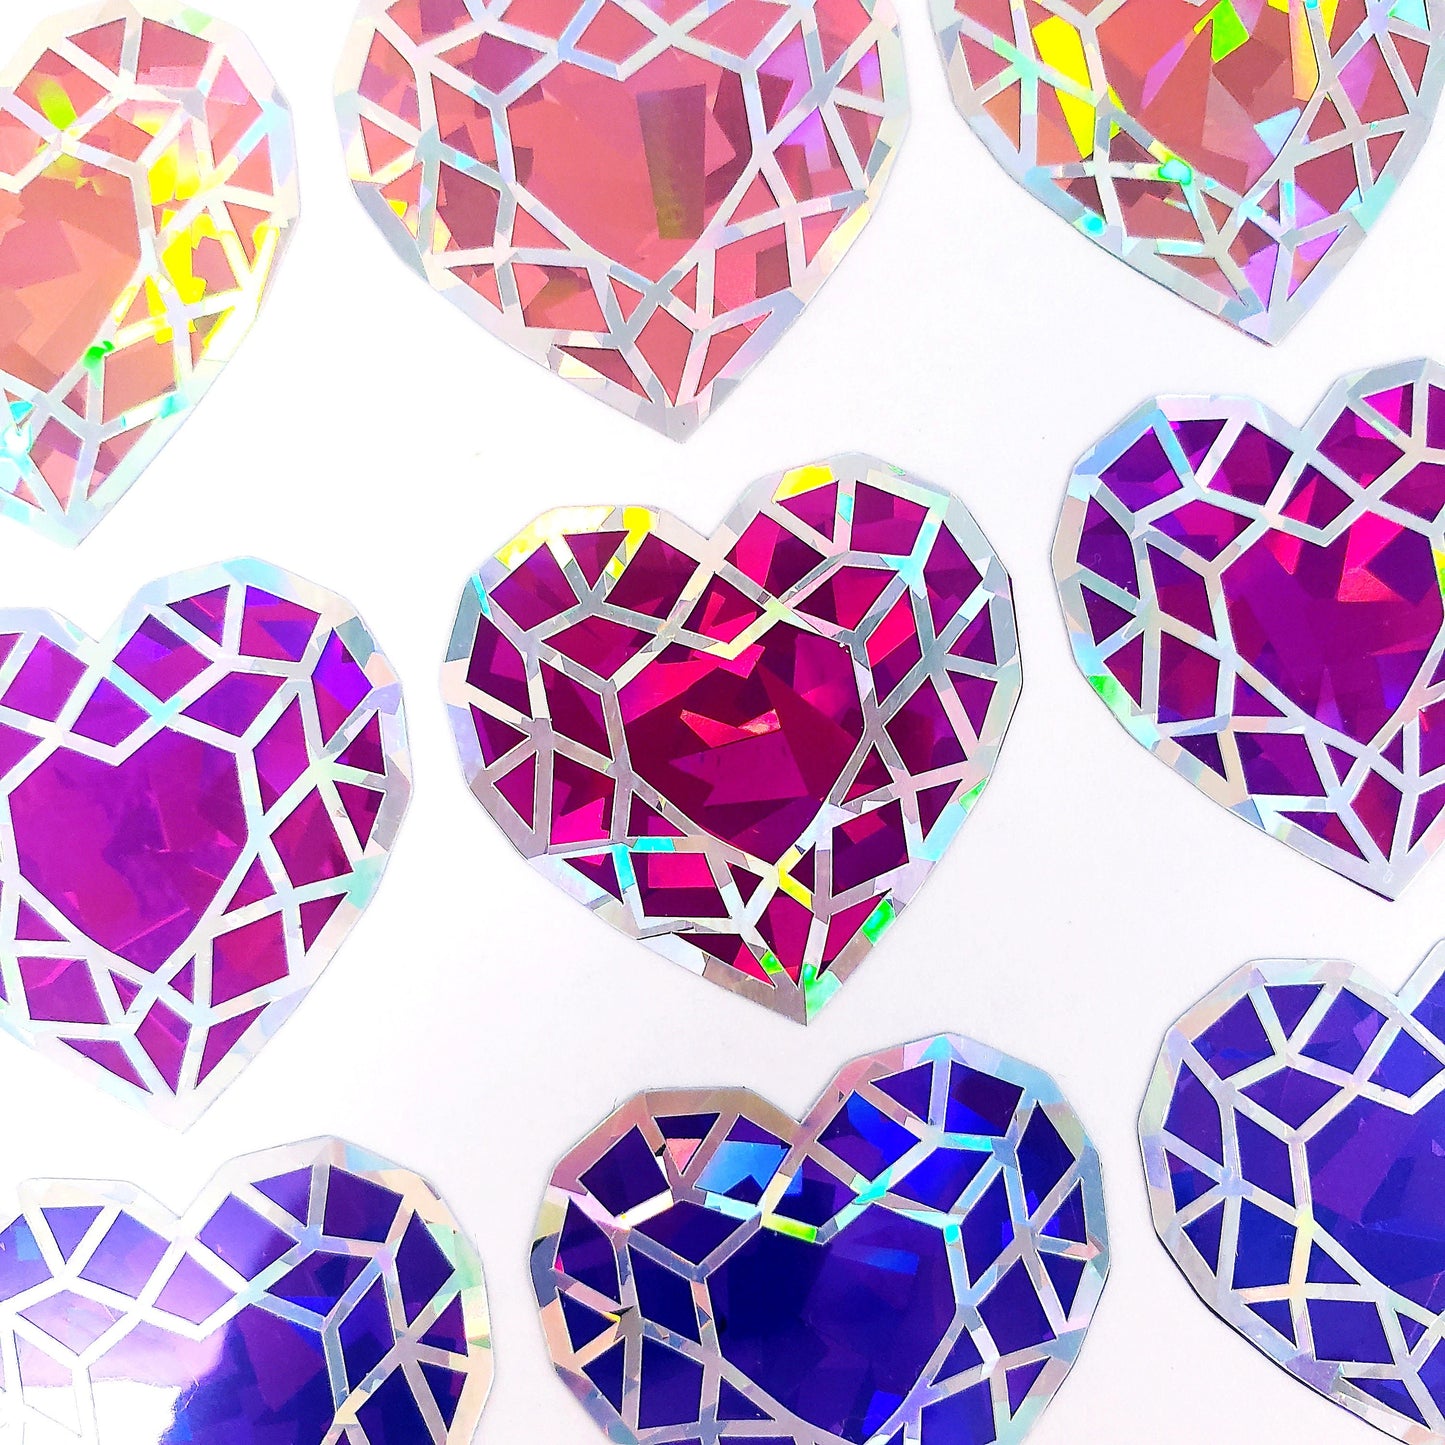 Pink Heart Stickers, set of 5 sparkly gems, vinyl decals for journals, tumblers, notecards and crafts, October birthstone, Libra gift.